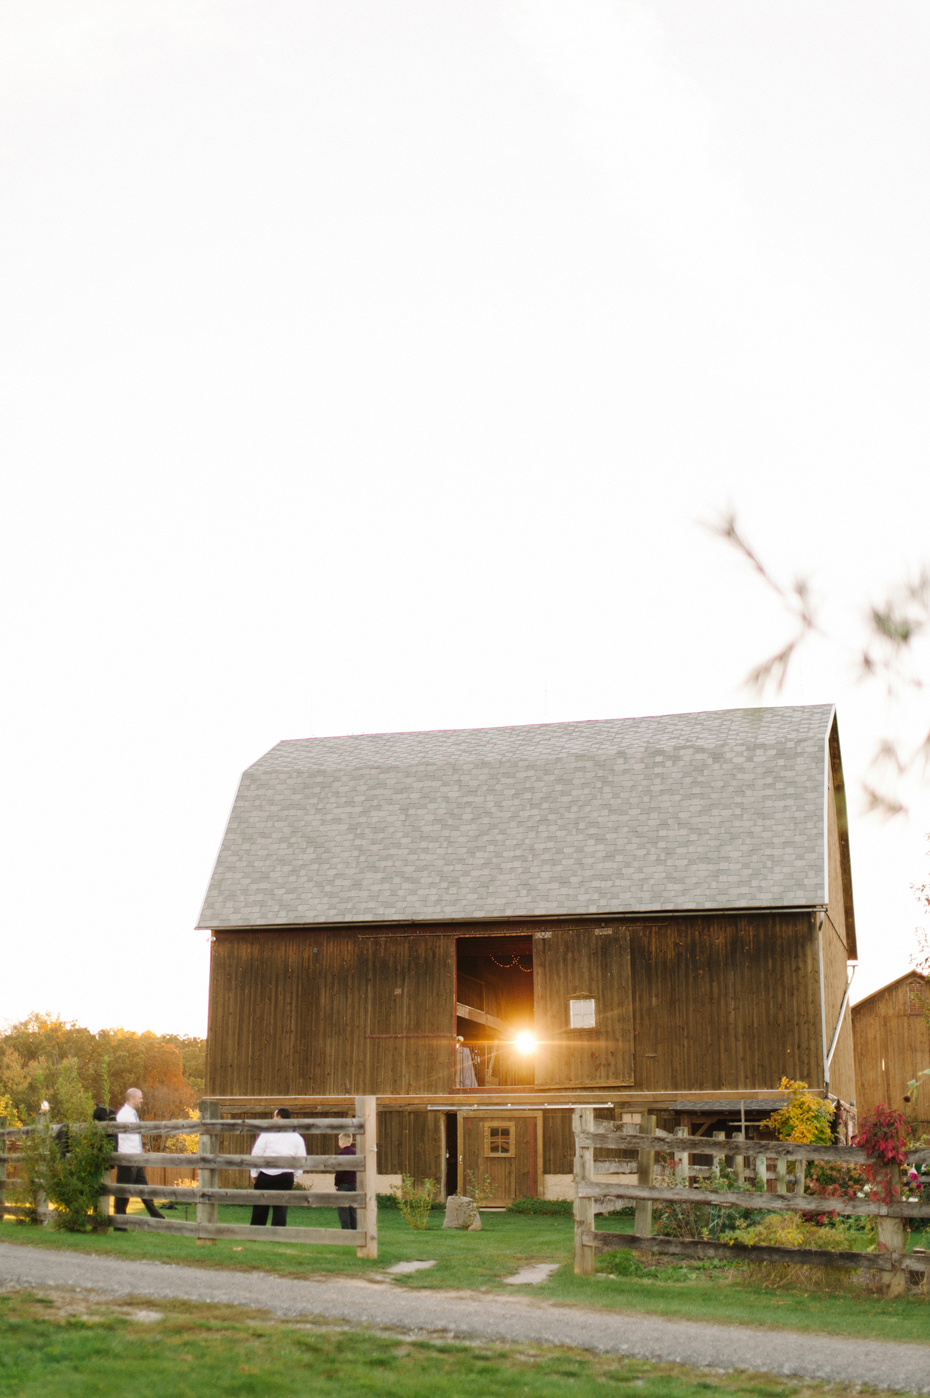 The grounds at Misty Farms by photojournalistic Michigan wedding photographer Heather Jowett.